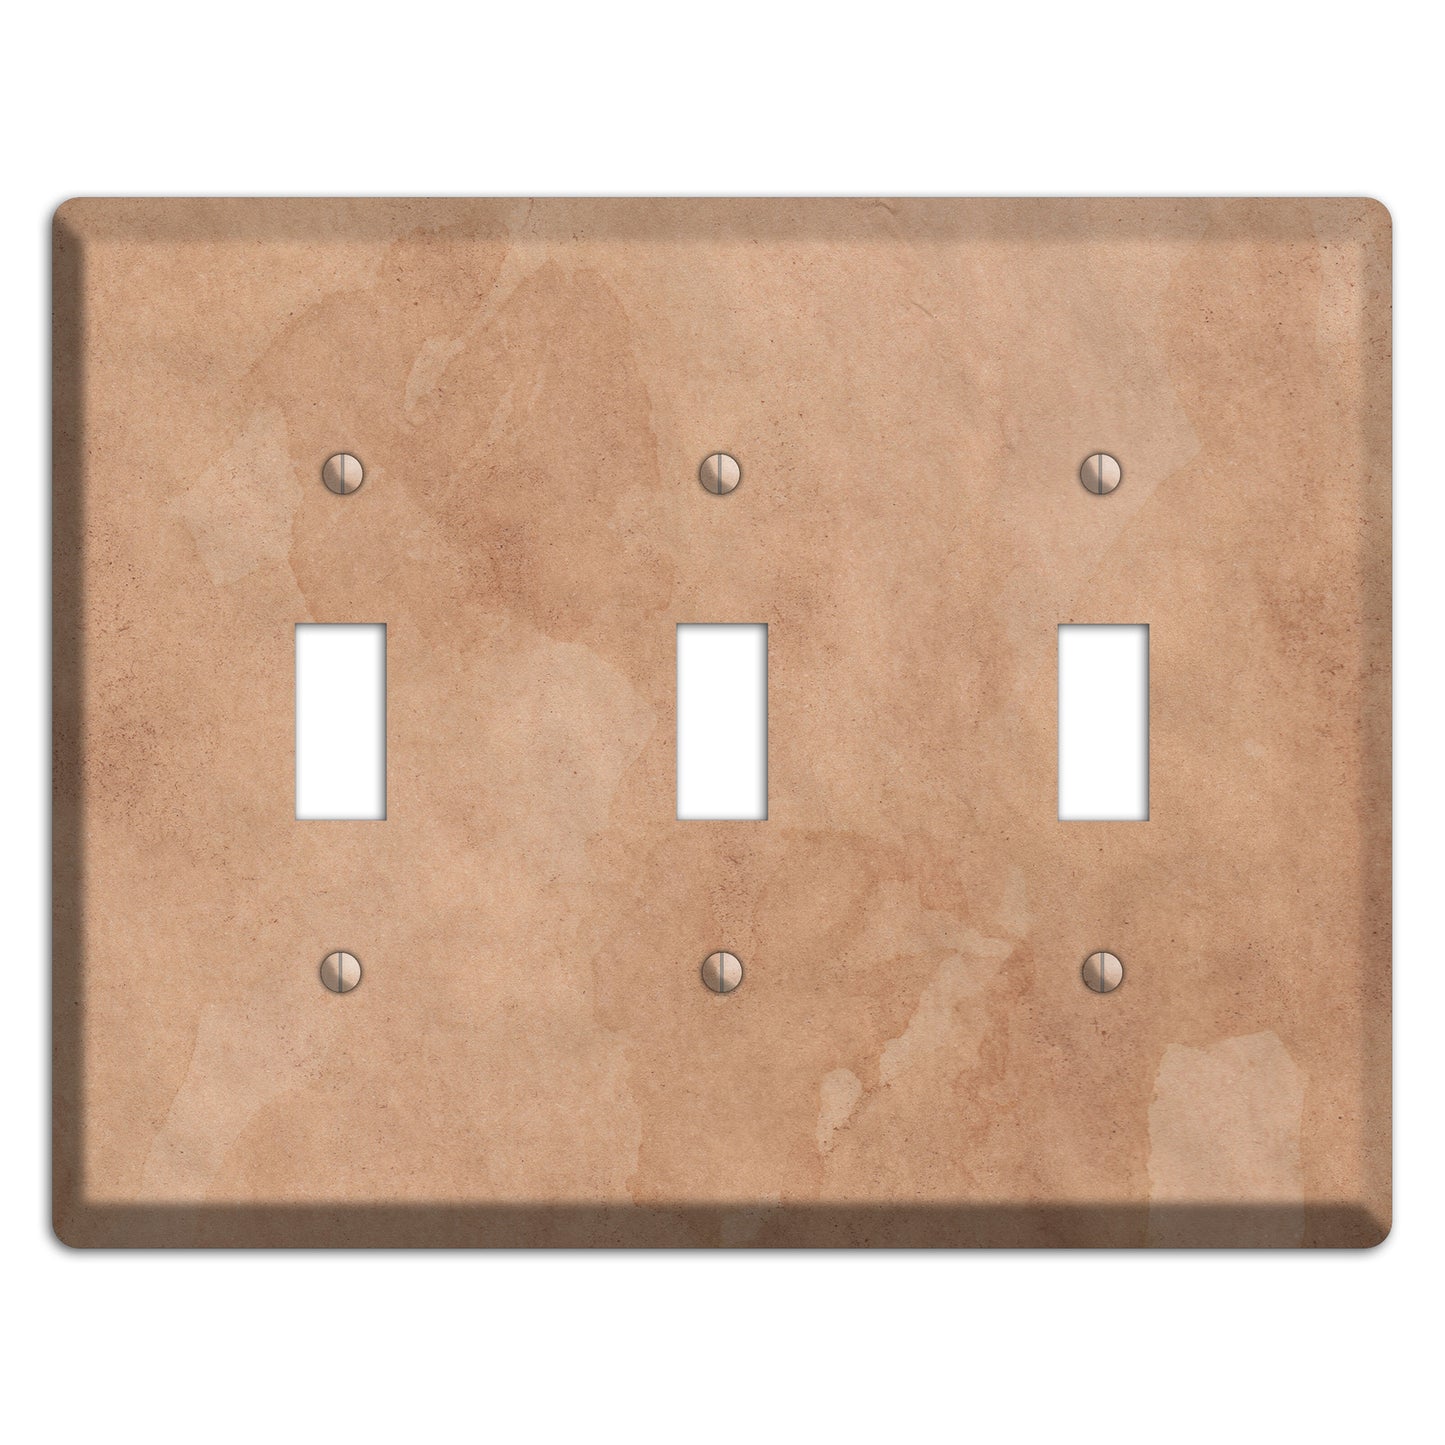 Aged Paper 3 3 Toggle Wallplate